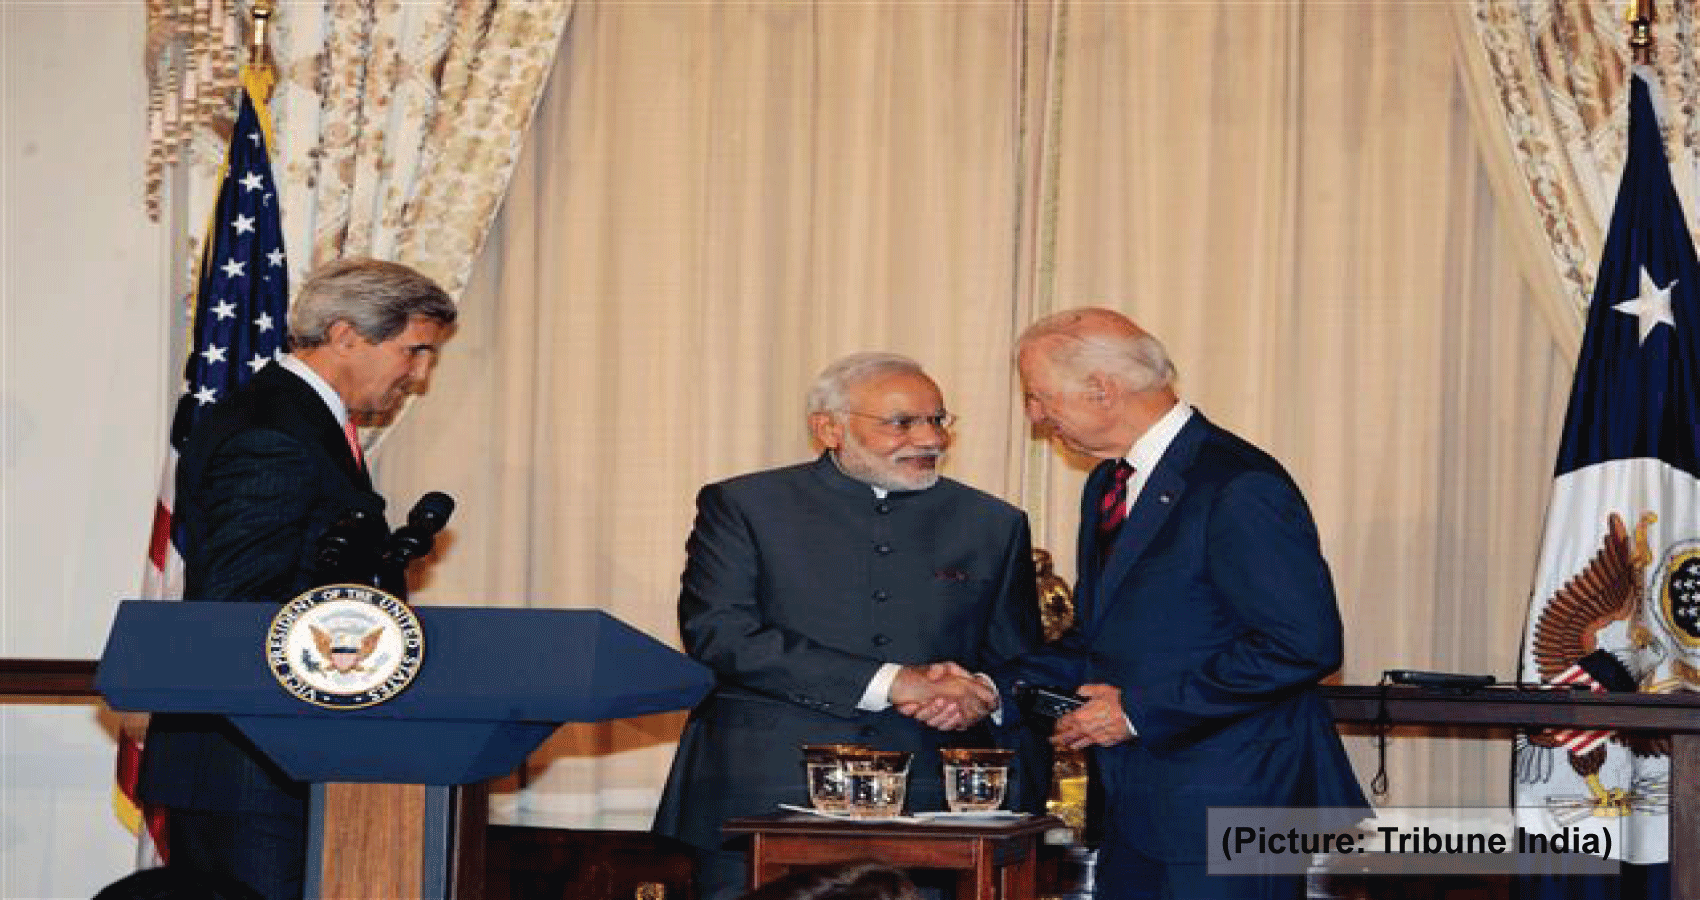 Modi And Joe Biden To Strengthen Peace & Security In Indo-Pacific Region, India Has High Hopes Ties with U.S. Will Deepen Under Biden